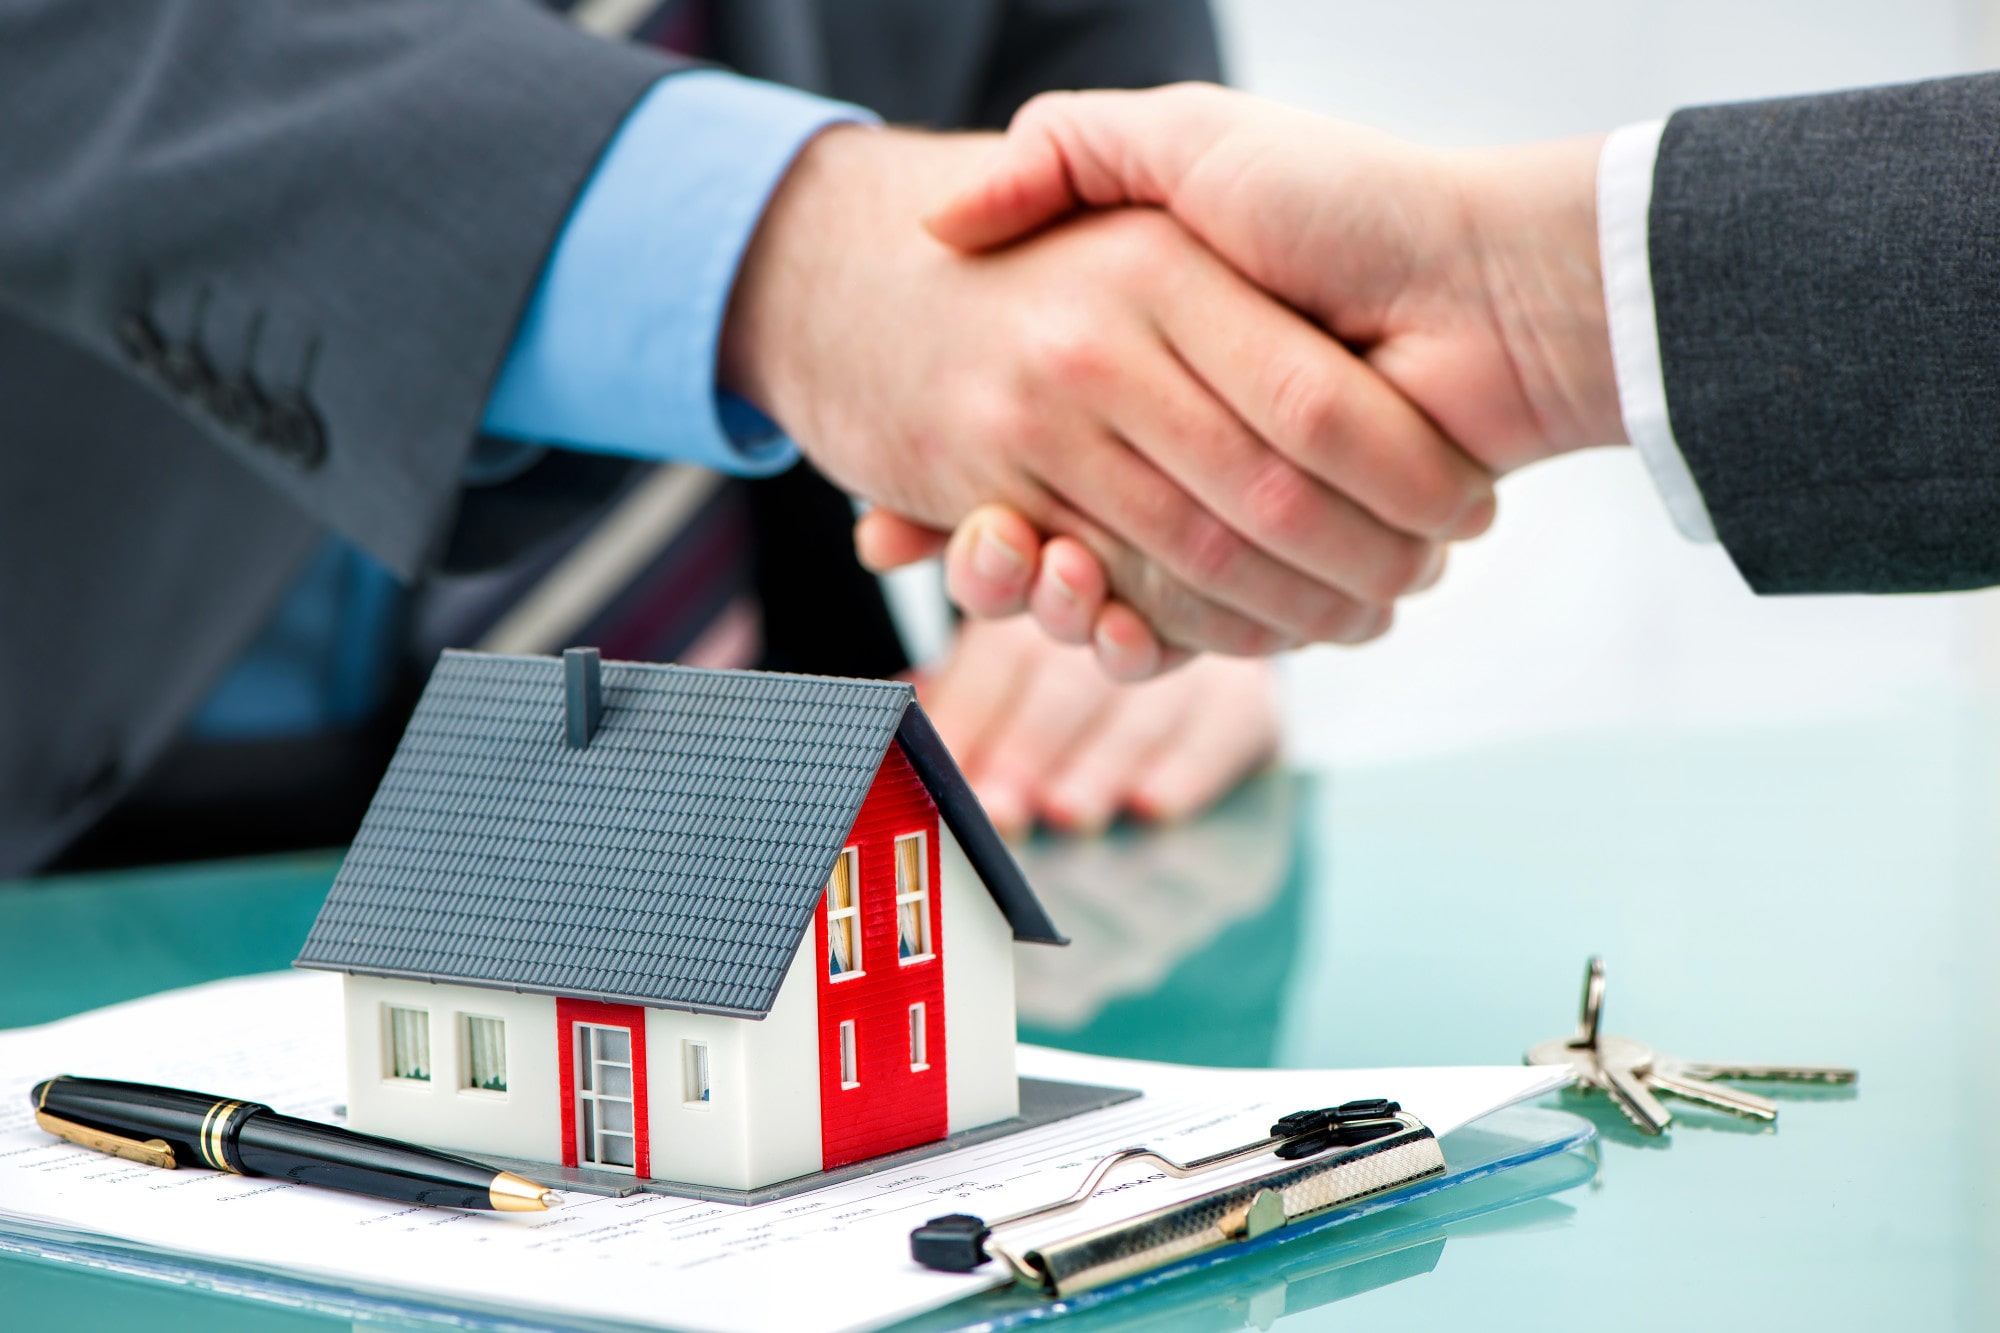 5 Effective Tips for Becoming a Landlord